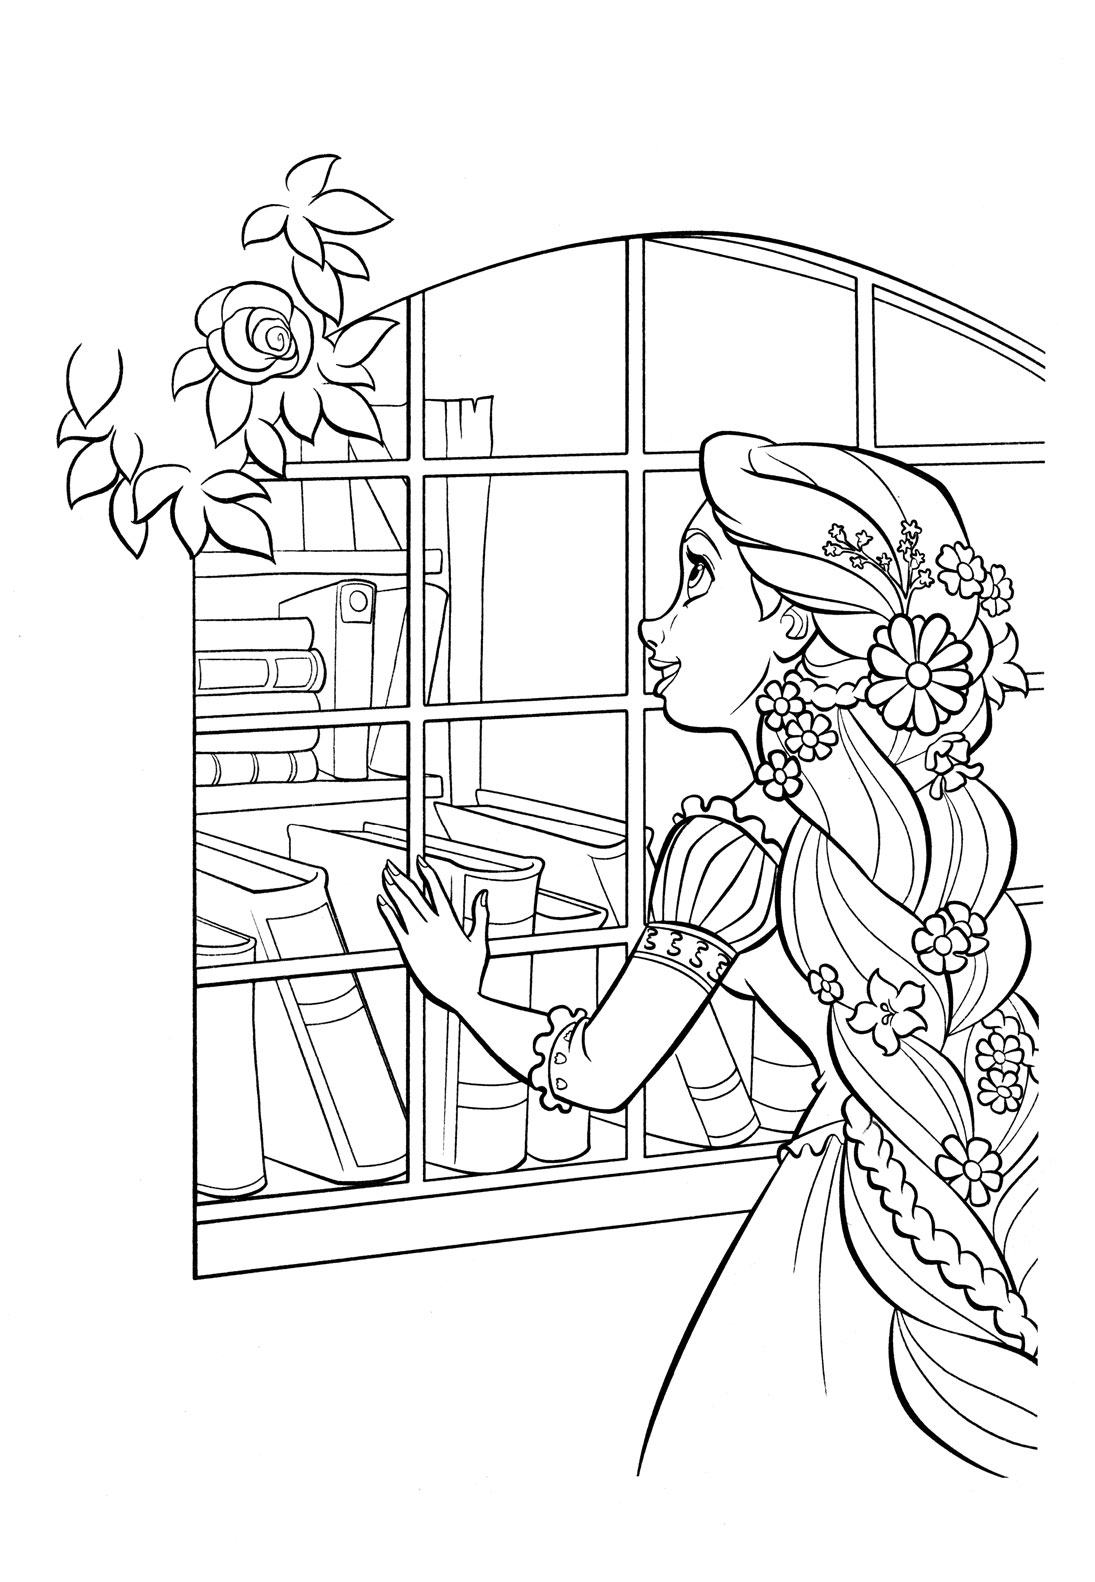 Download Rapunzel Coloring Pages - Best Coloring Pages For Kids